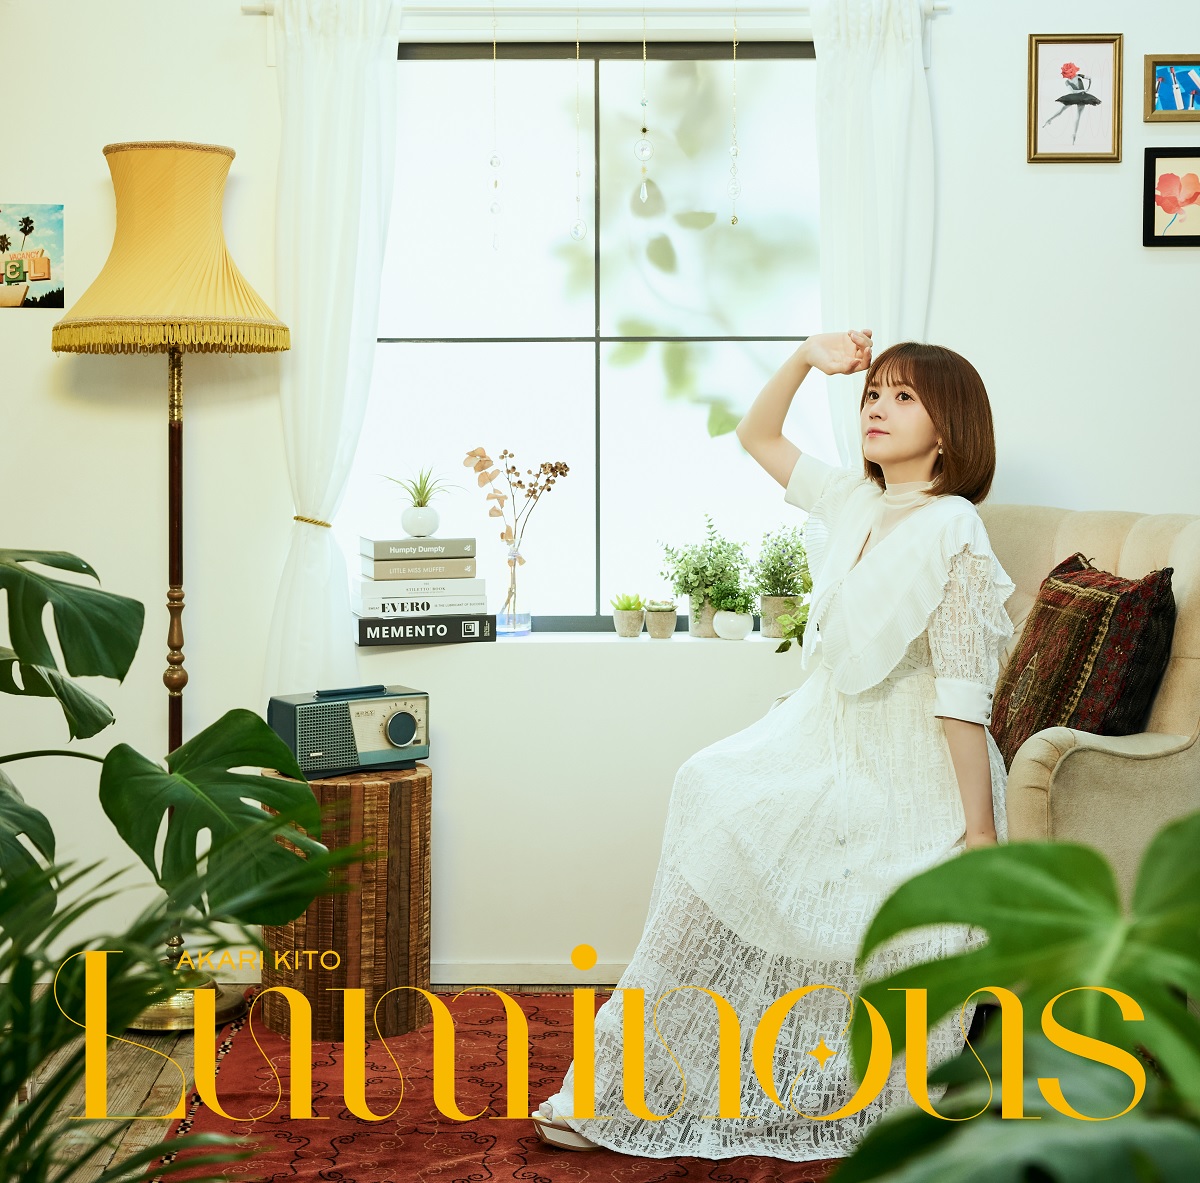 Cover art for『Akari Kito - Esquisse』from the release『Luminous』